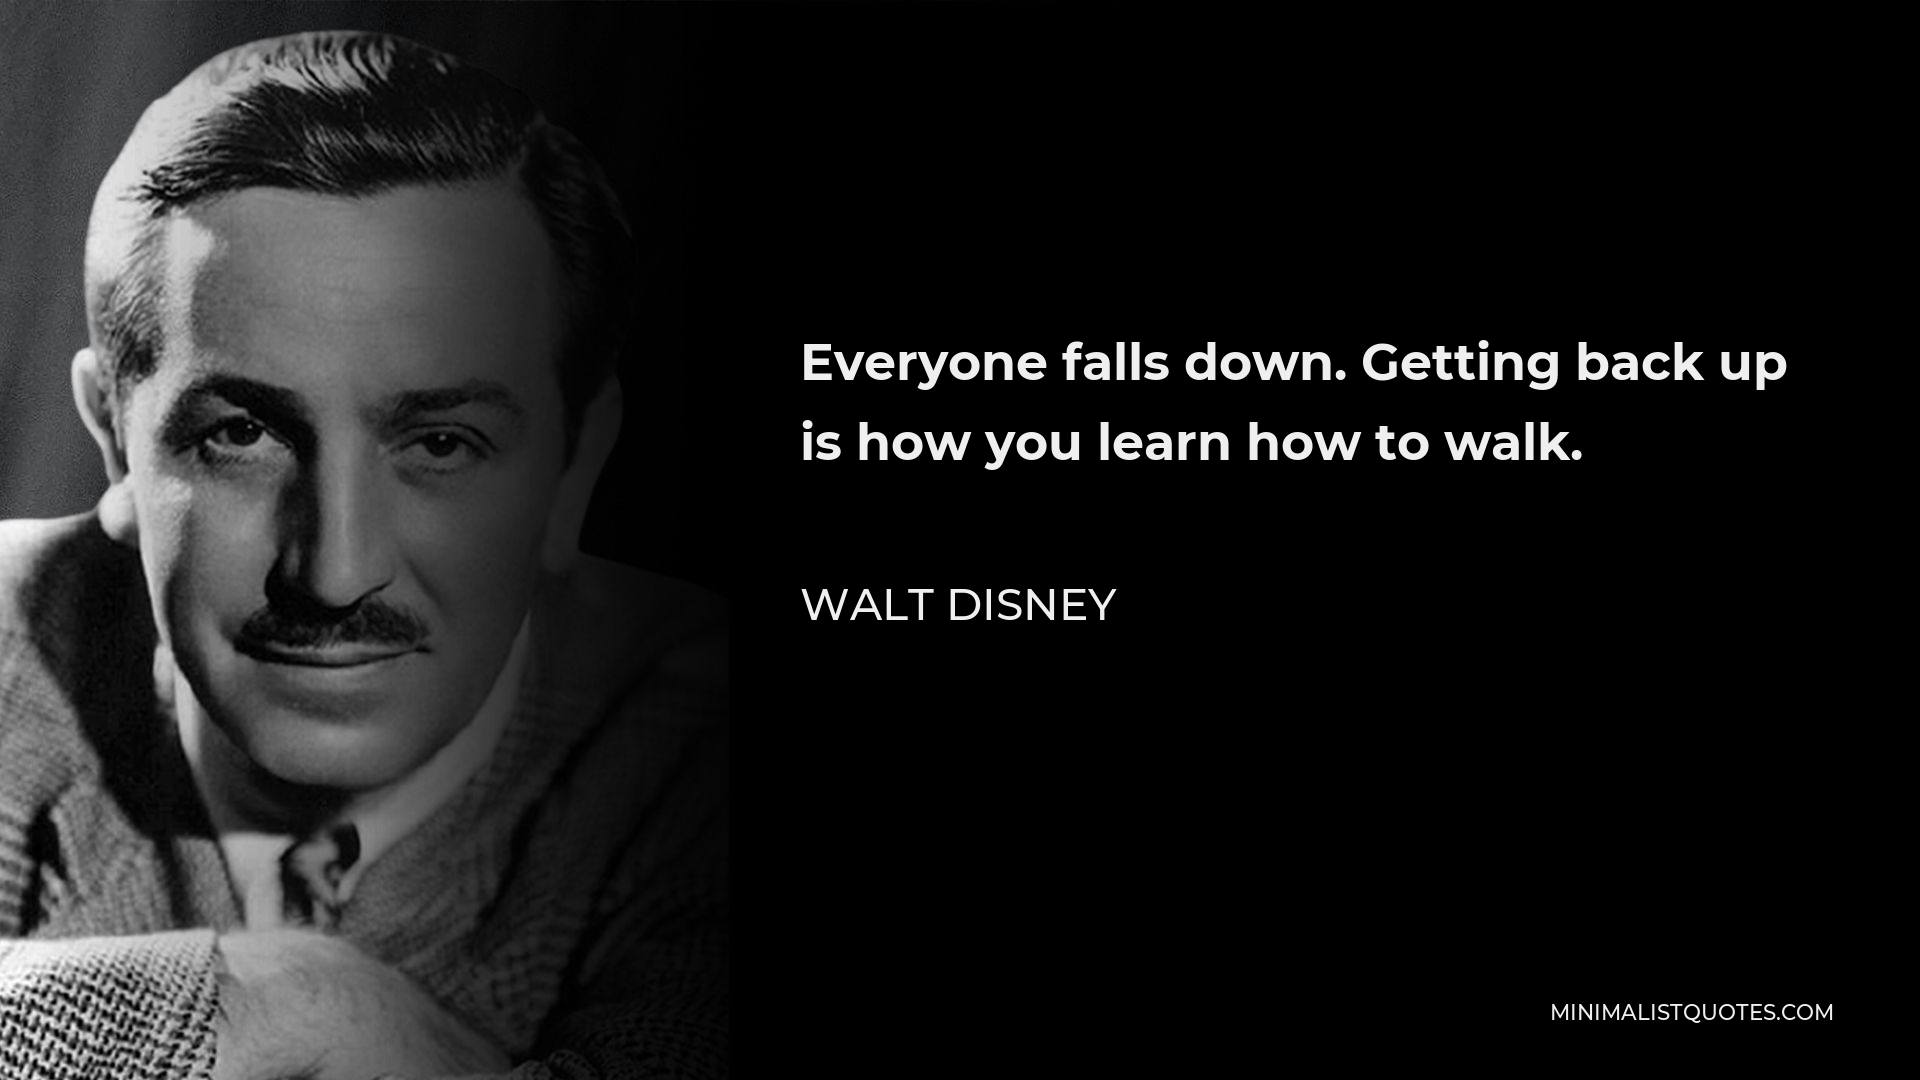 Walt Disney Quote - Everyone falls down. Getting back up is how you learn how to walk.